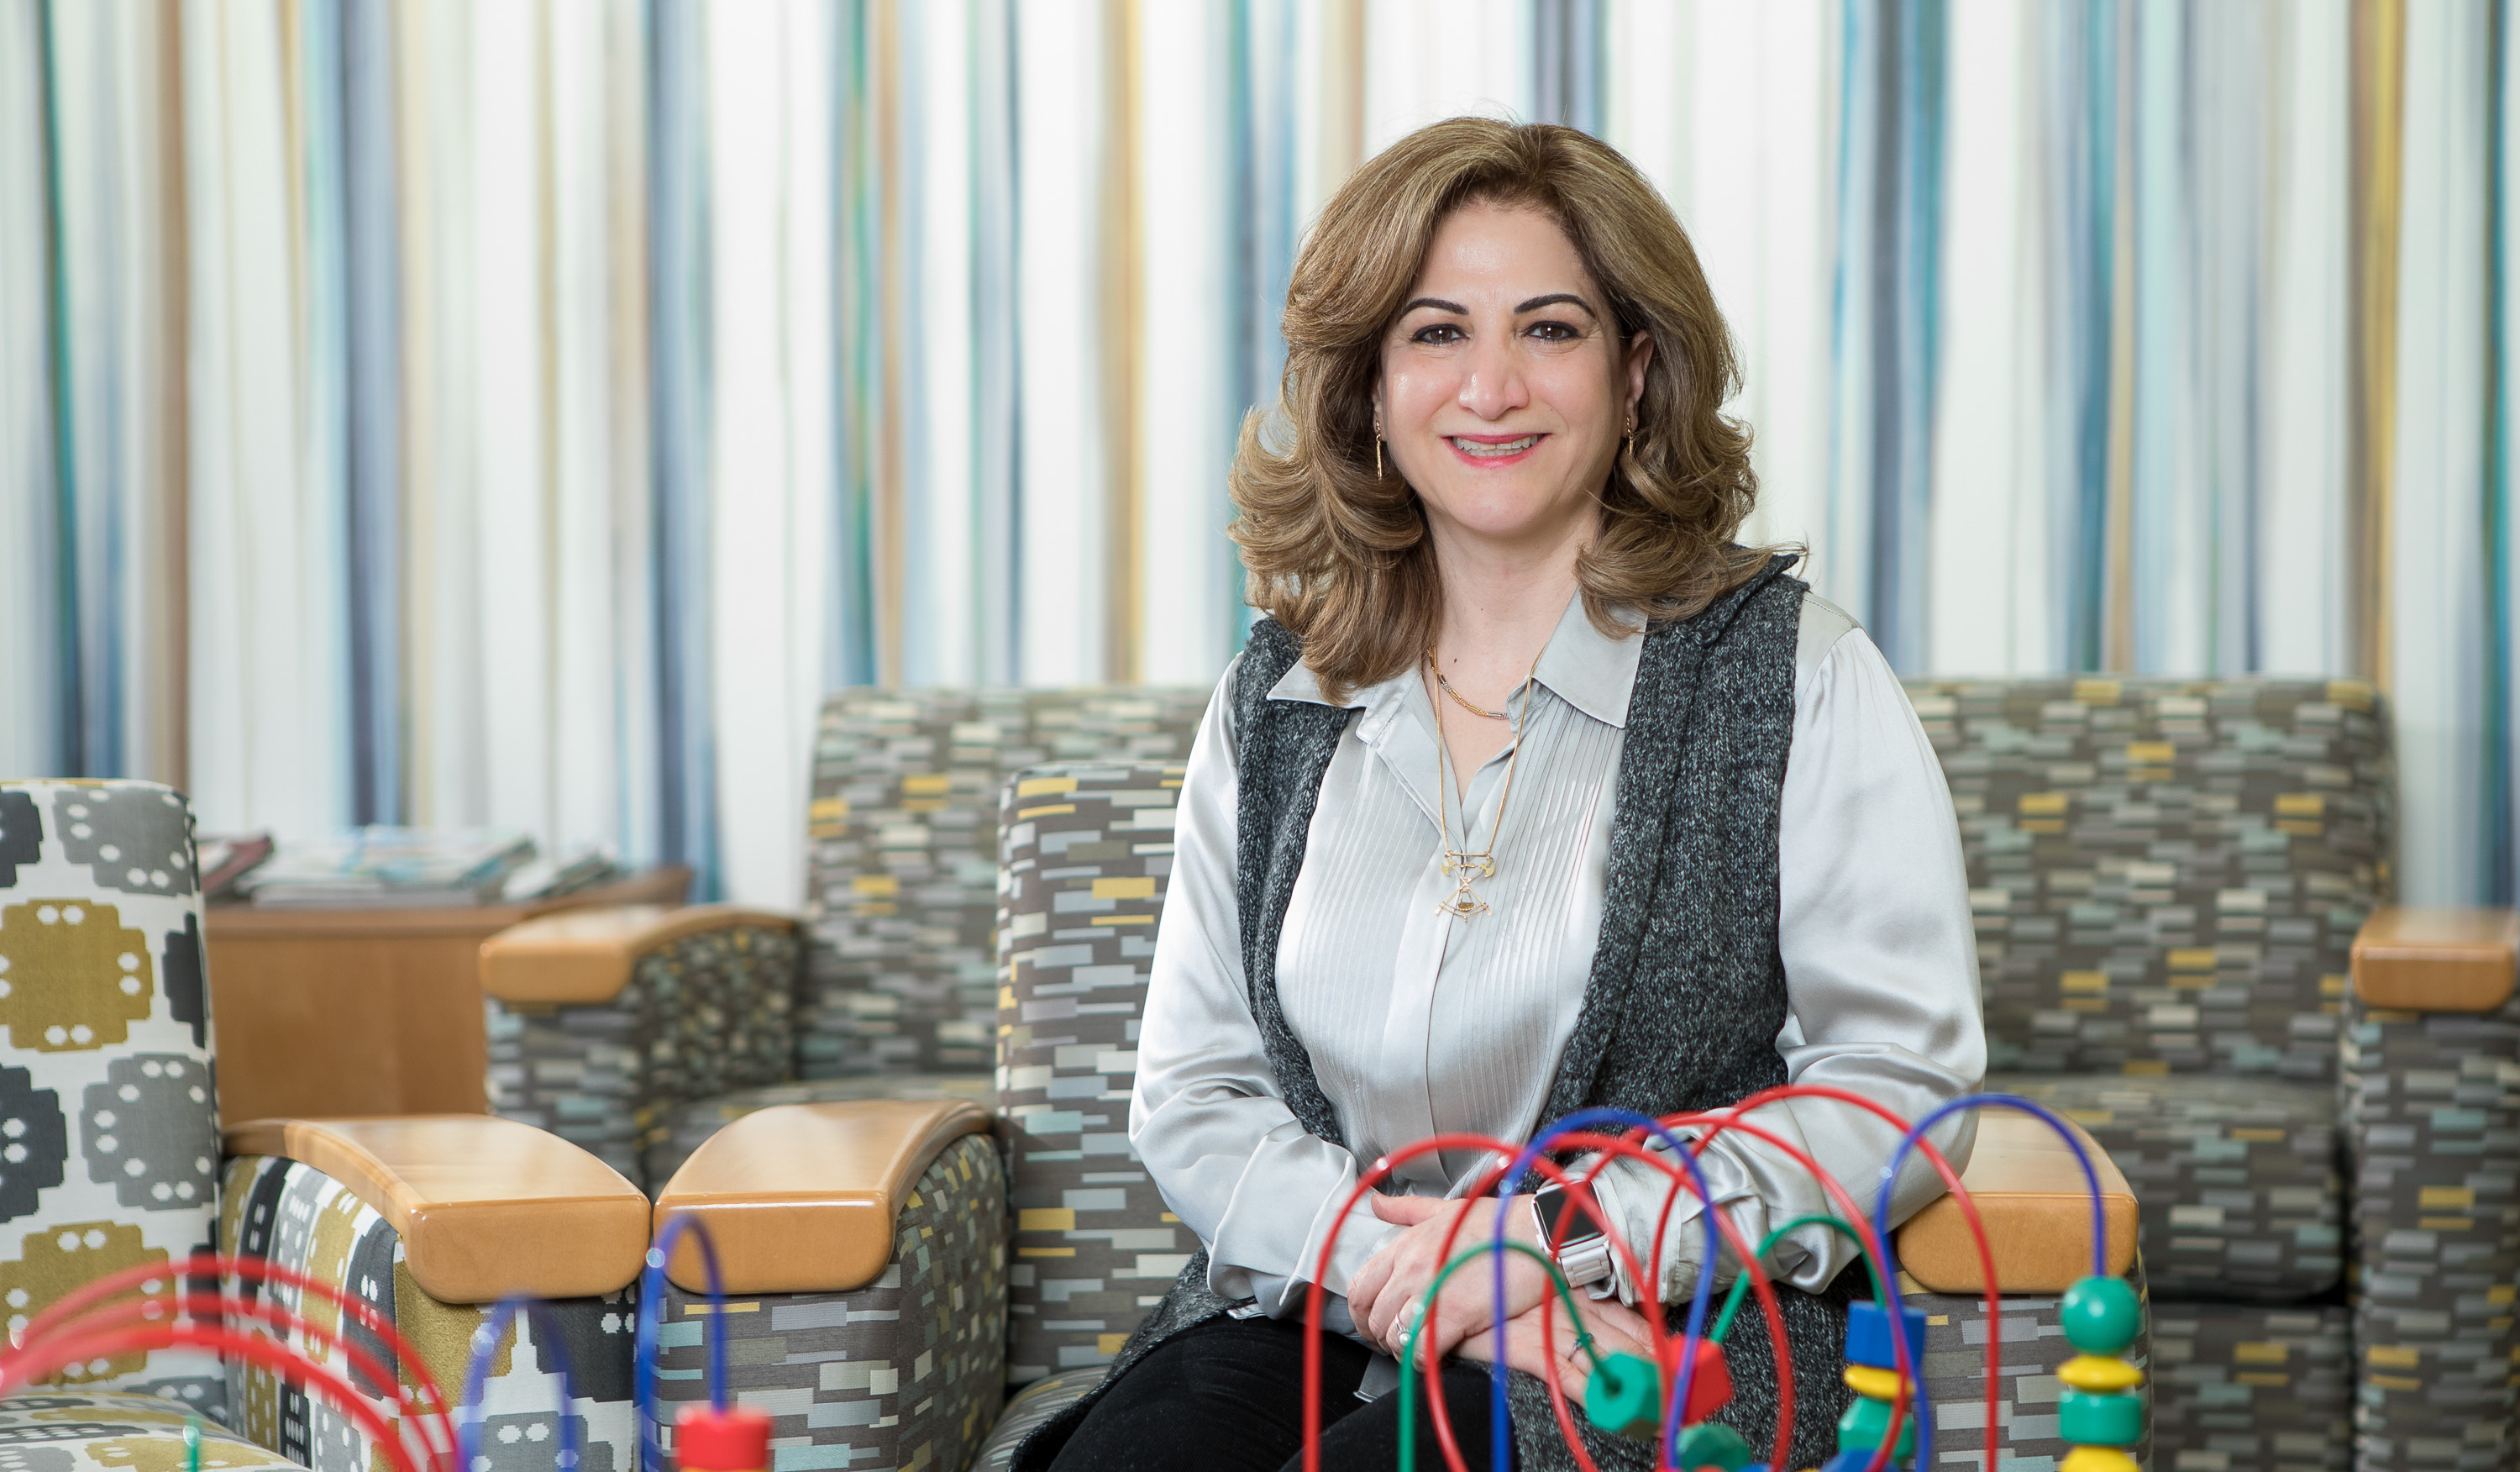 Mojdeh Bayat, a professor of child development and early education at DePaul University